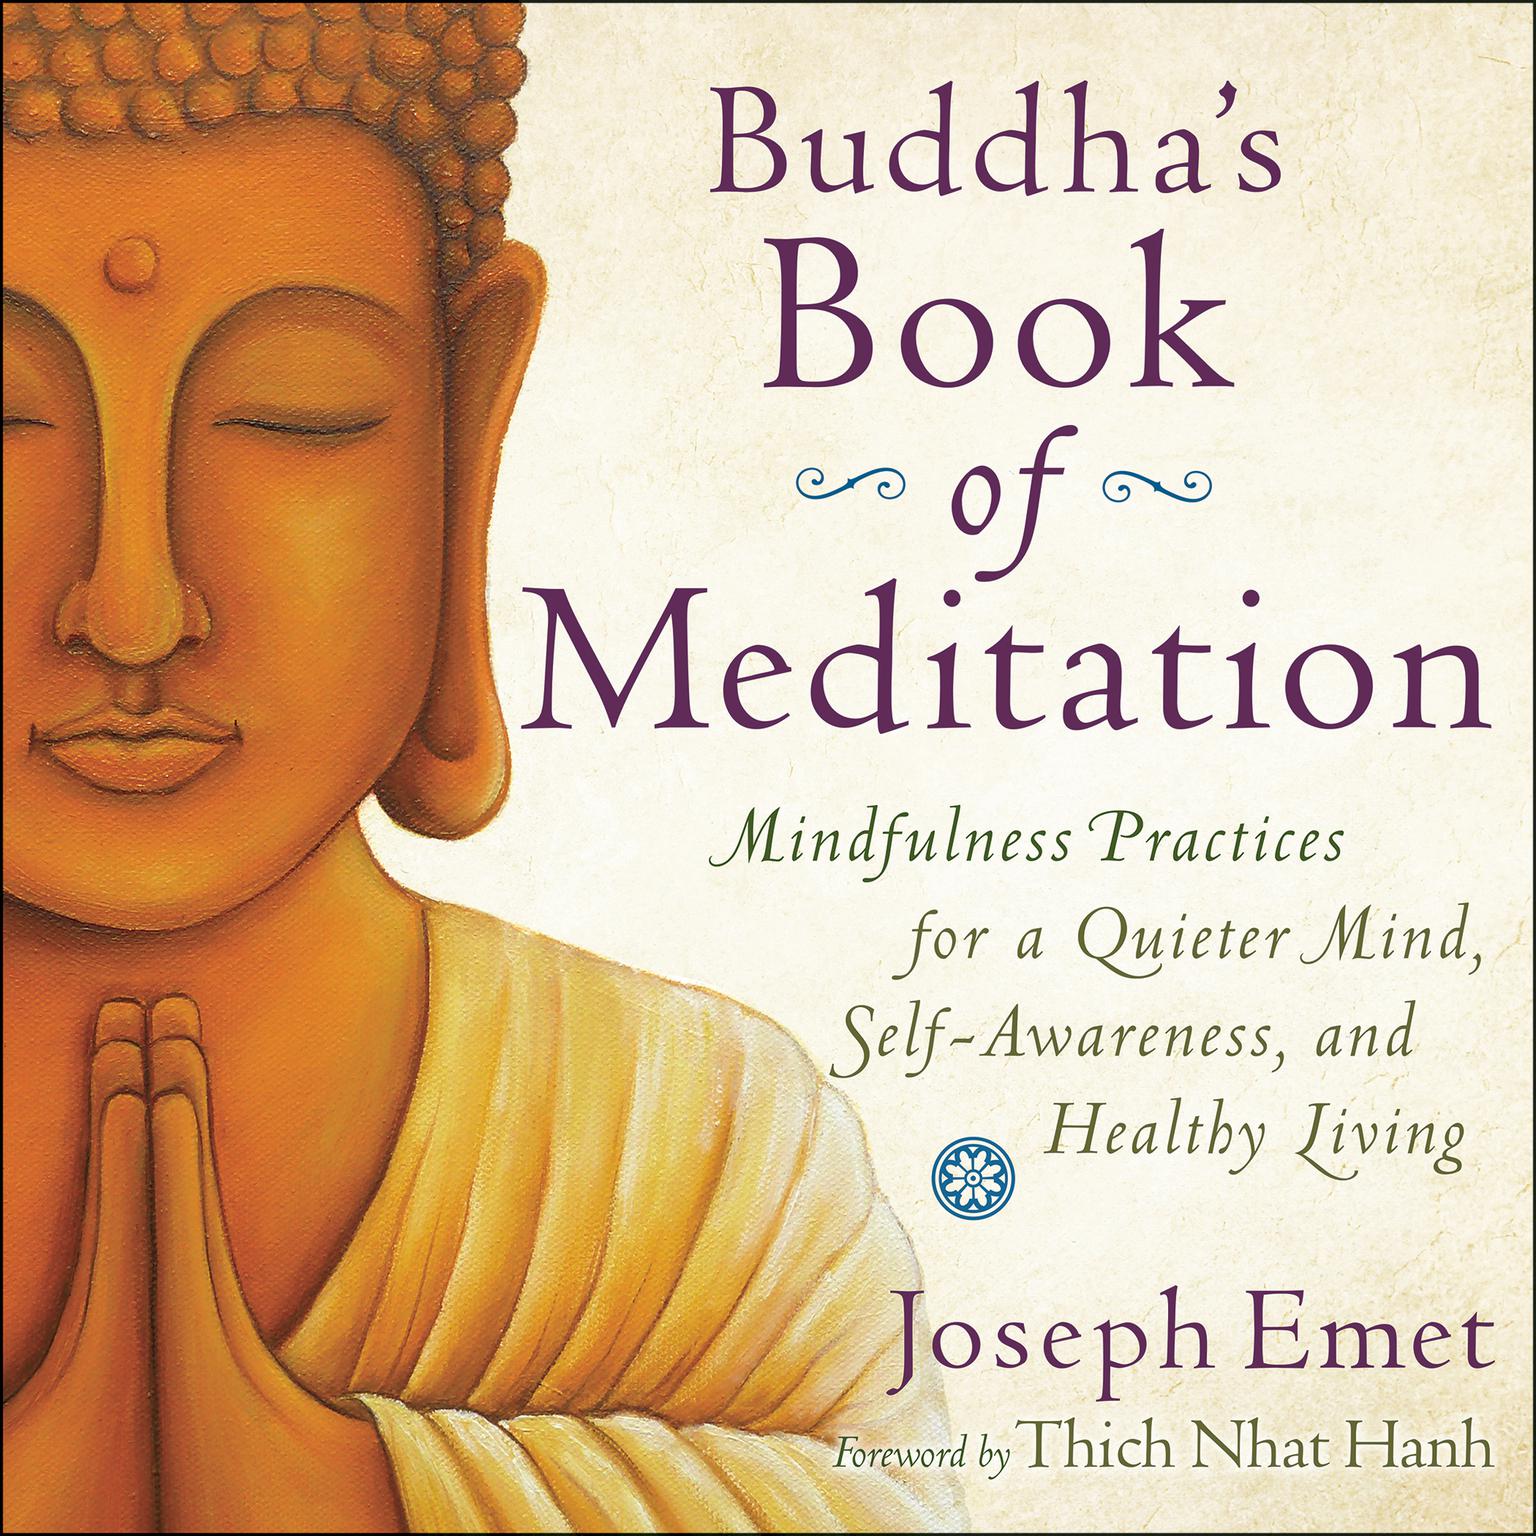 Buddhas Book of Meditation: Mindfulness Practices for a Quieter Mind, Self-Awareness, and Healthy Living Audiobook, by Joseph Emet